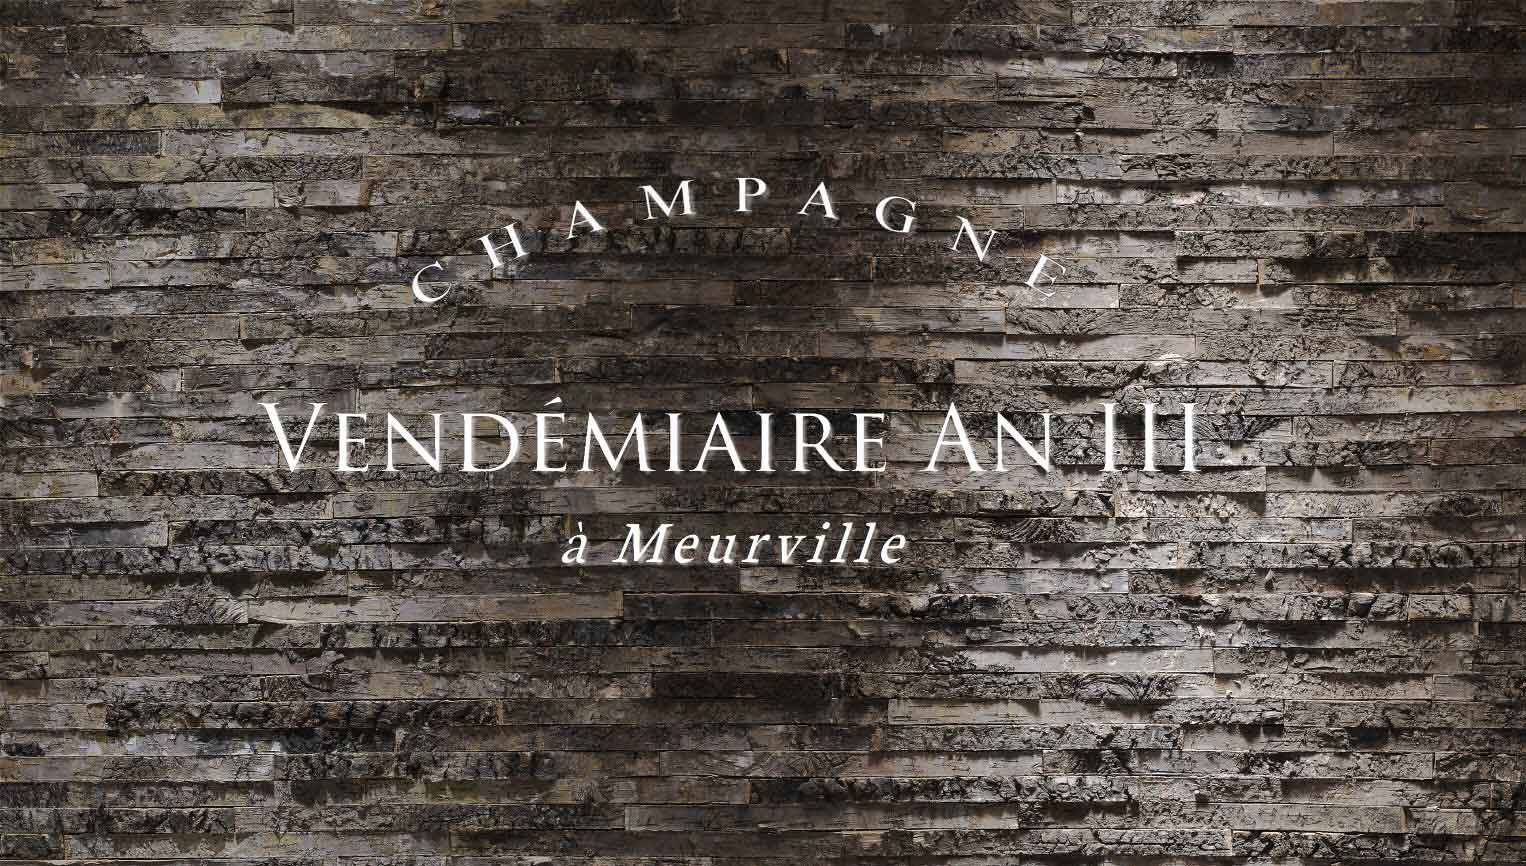 Champagne Vendémiaire An XIII